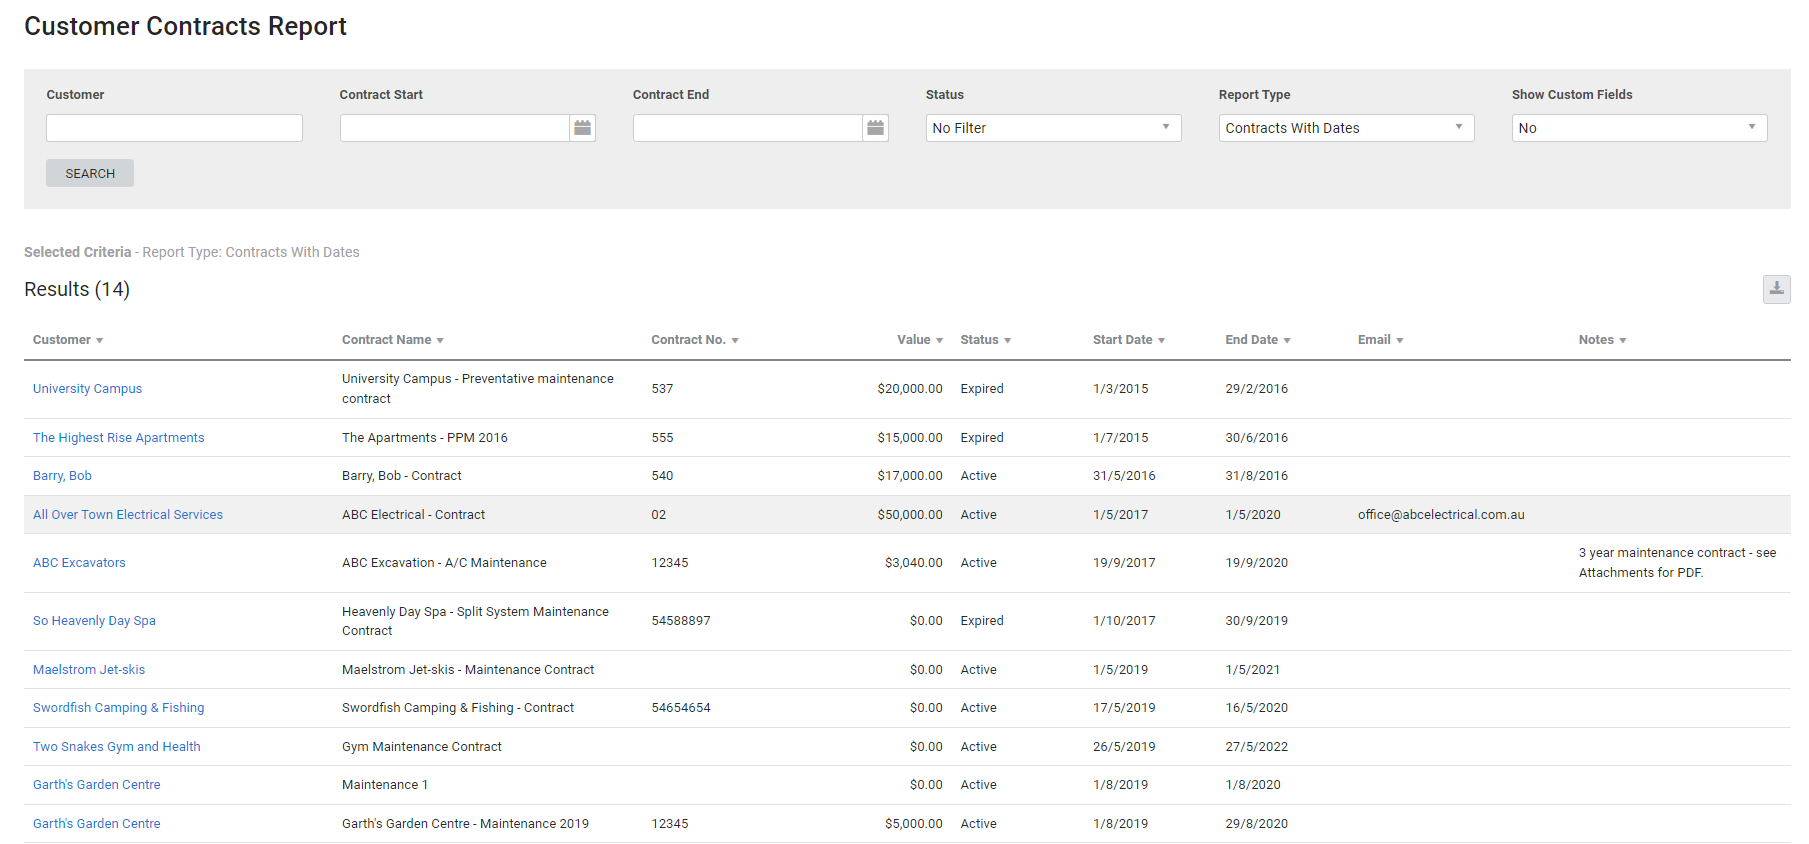 A screenshot of the customer contracts report.